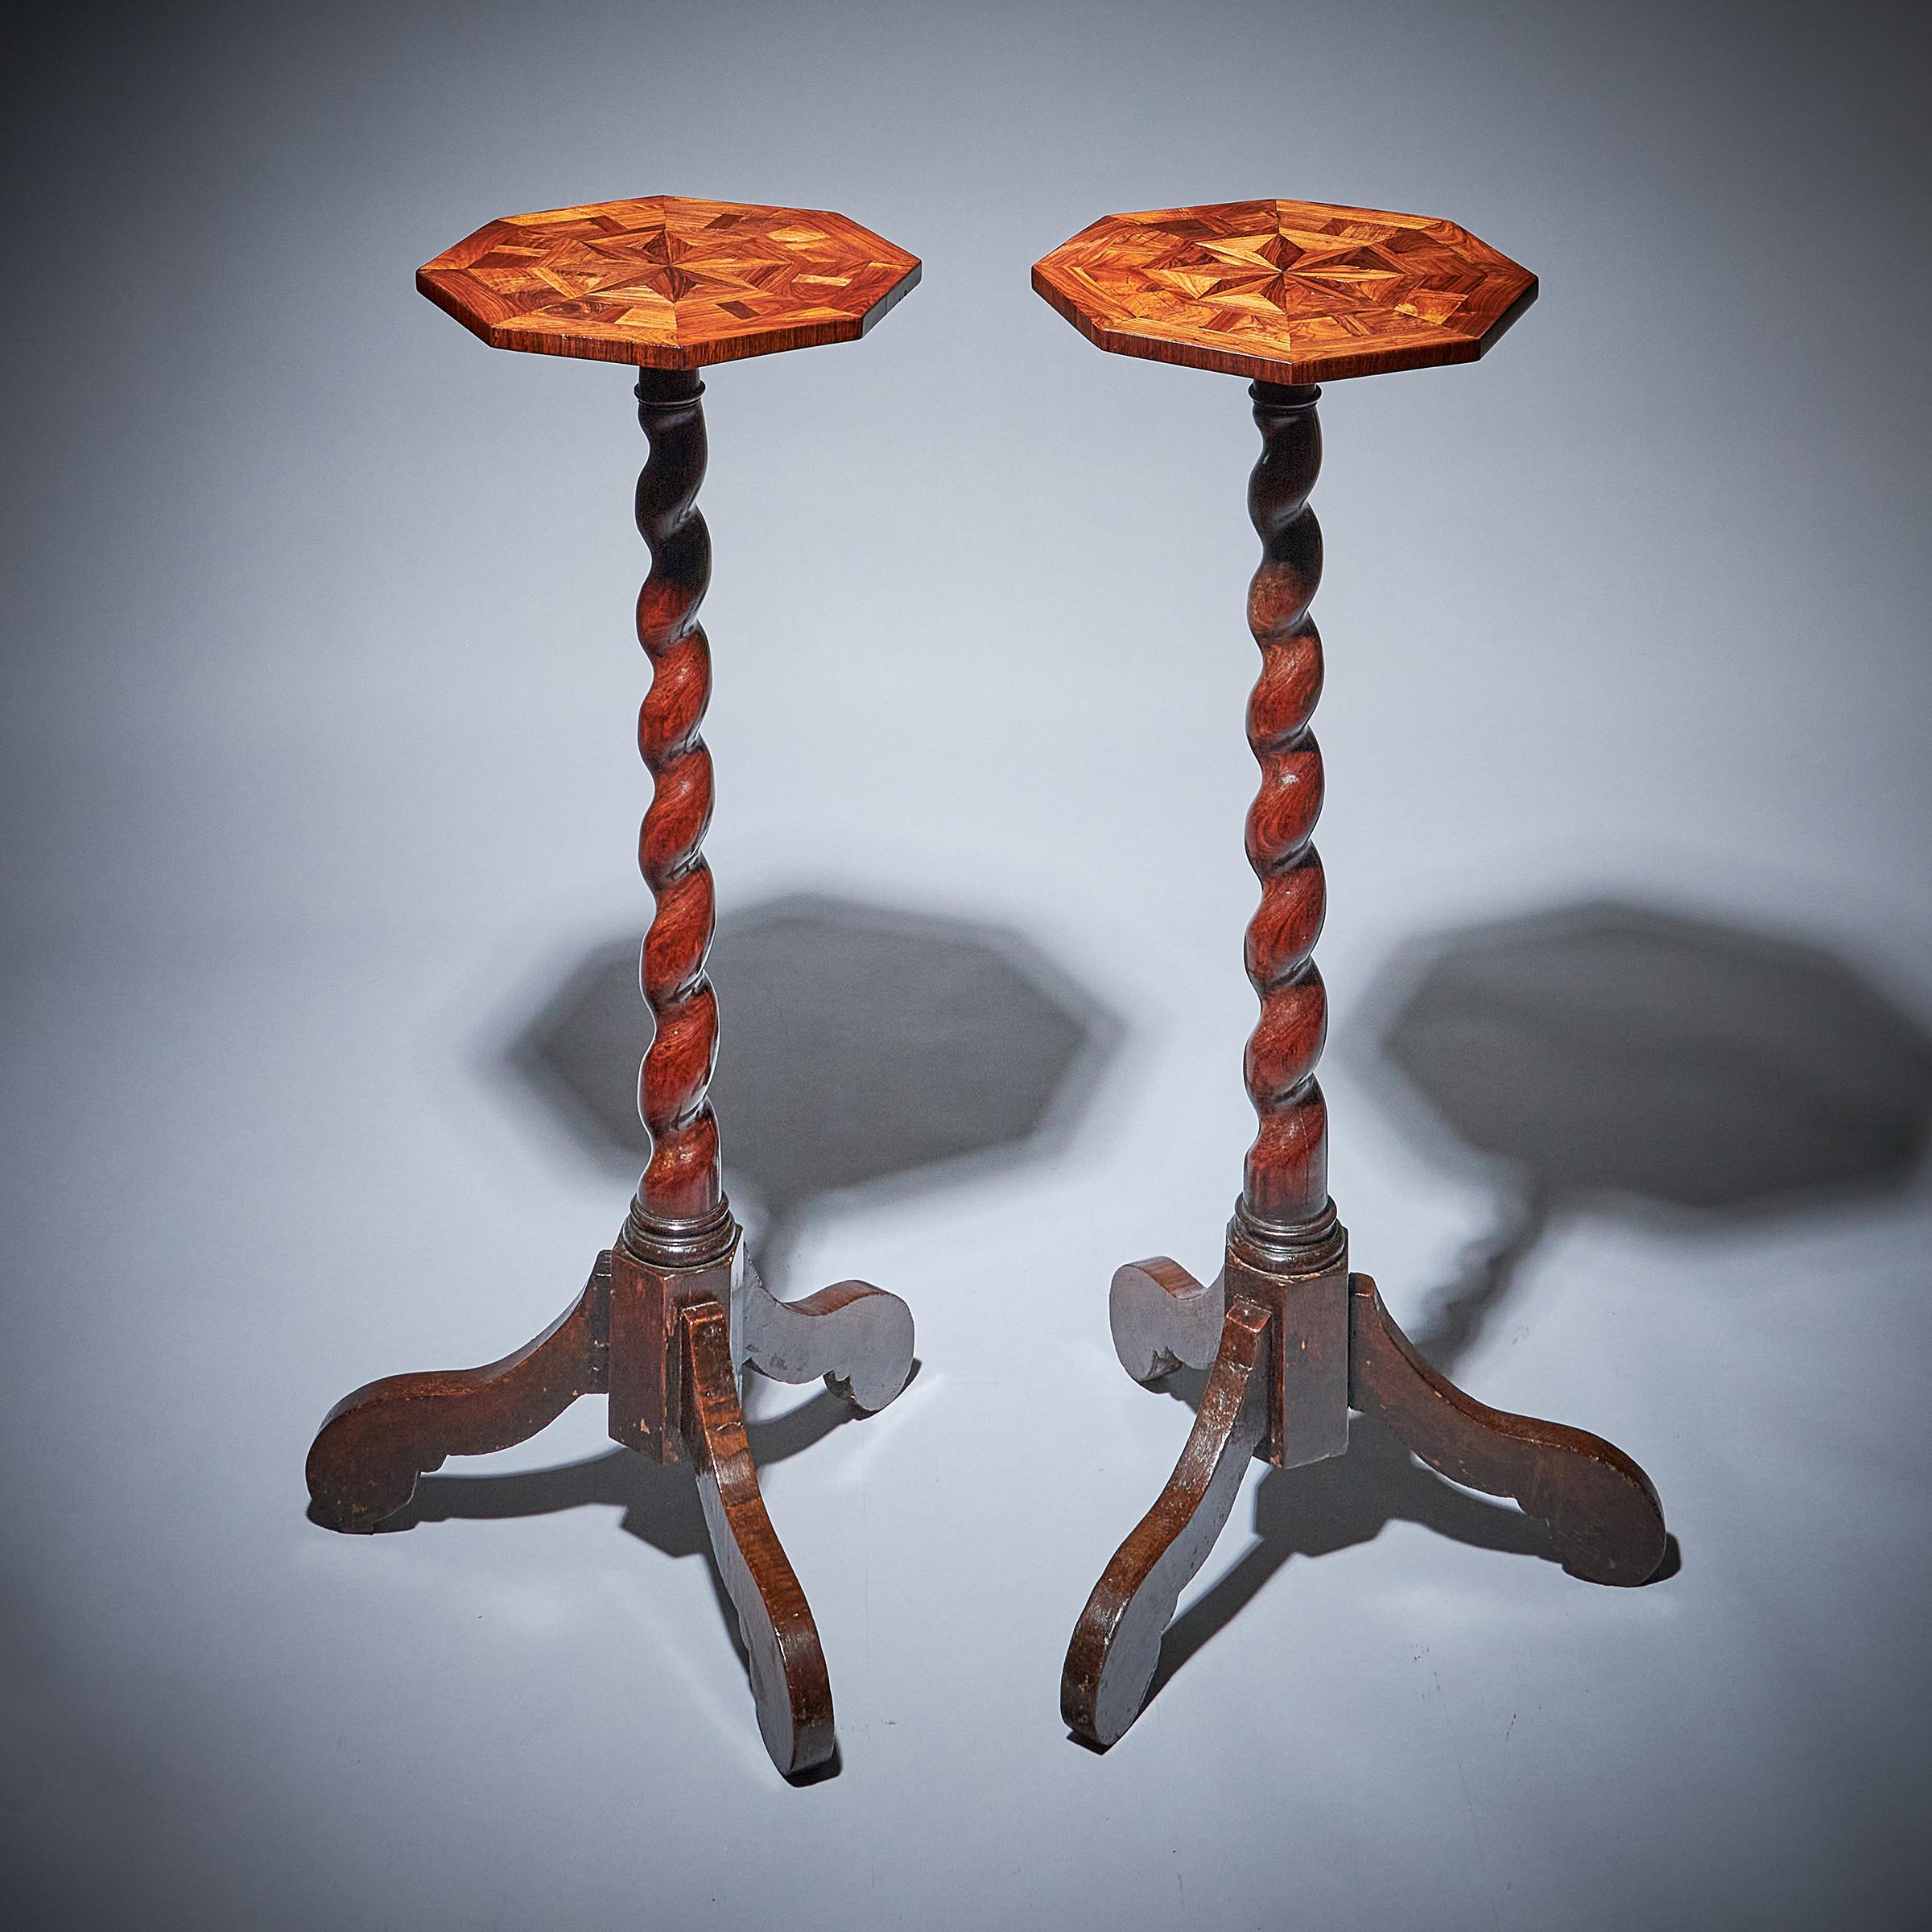 A Unique Pair of 17th Century Kingwood Charles II Parquetry Torchieres, Circa 1660. 2